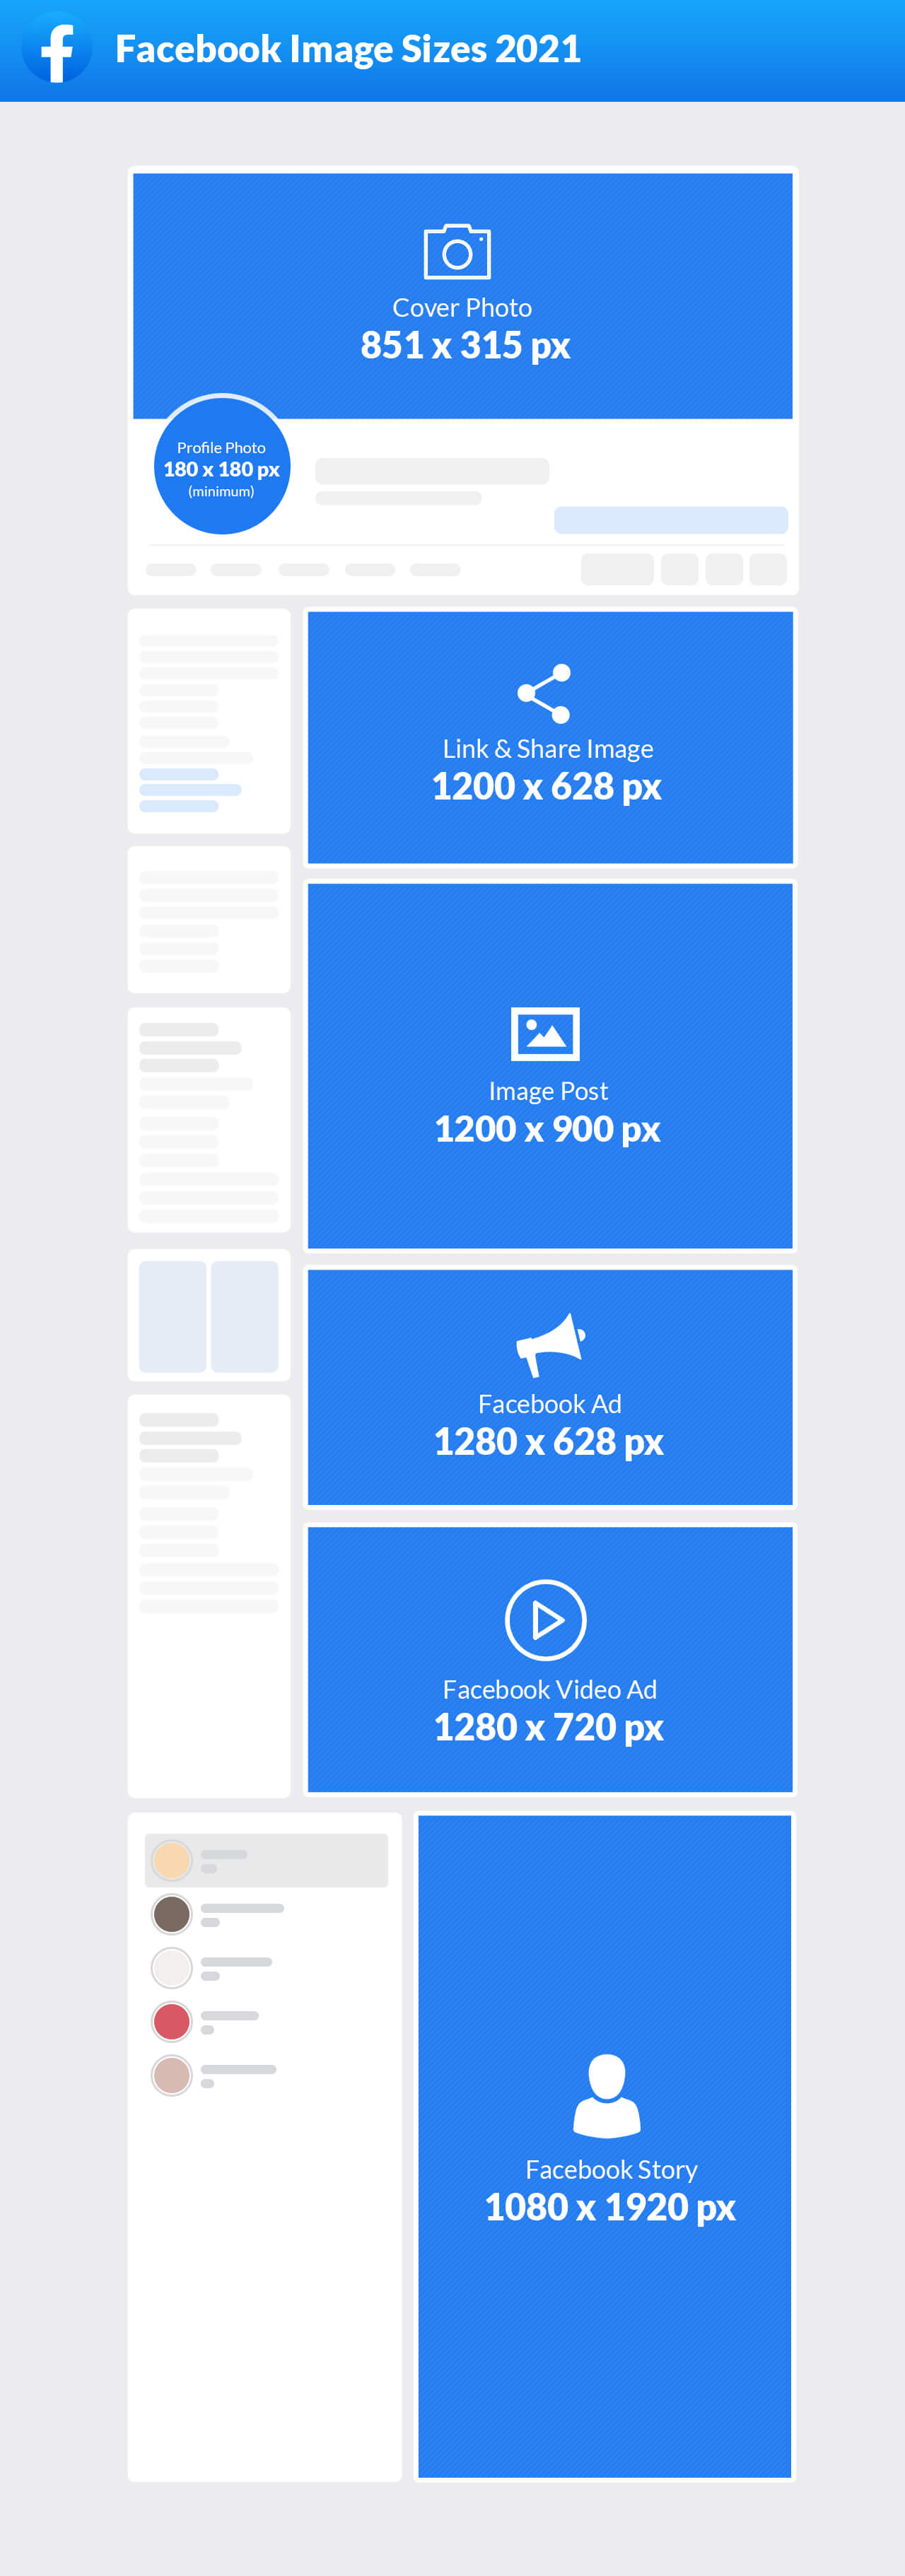 Facebook image size infographic 2021